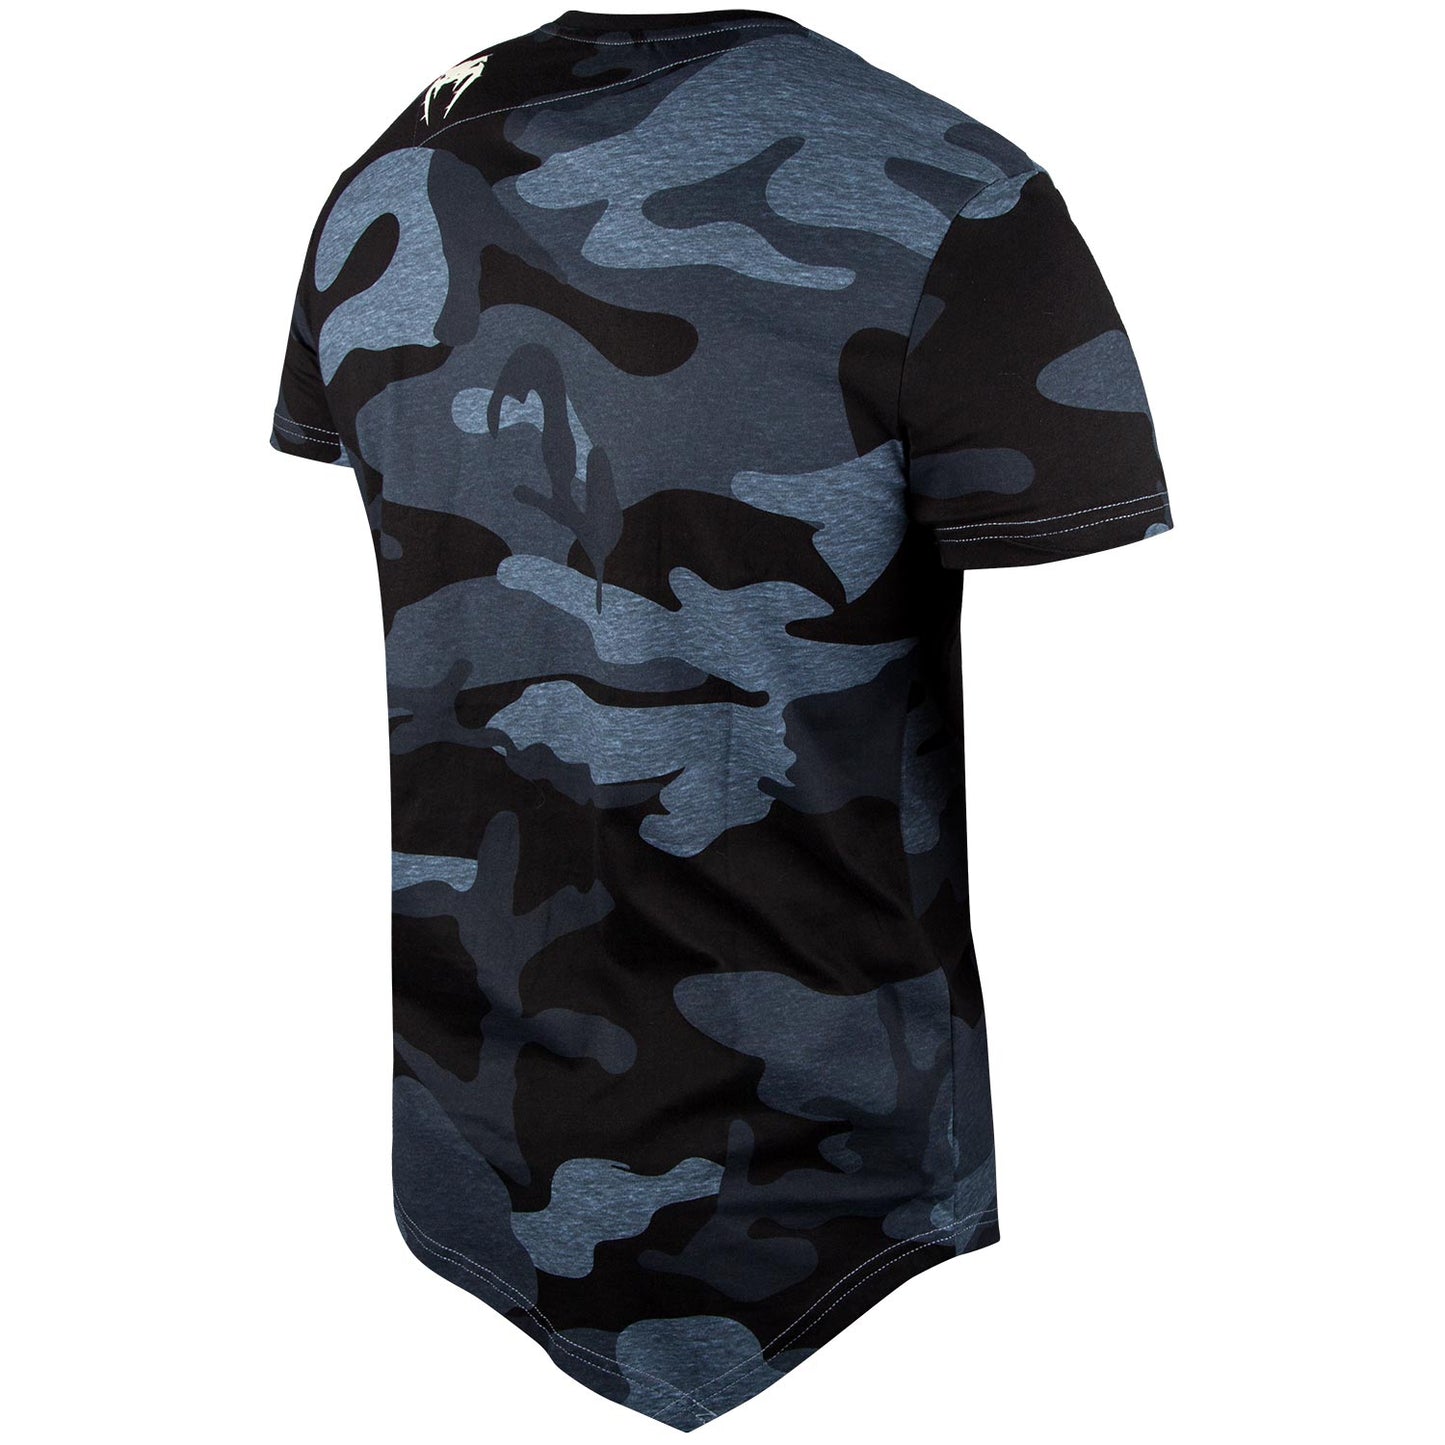 Venum Interference 2.0 T-Shirt - Dunkles Camo